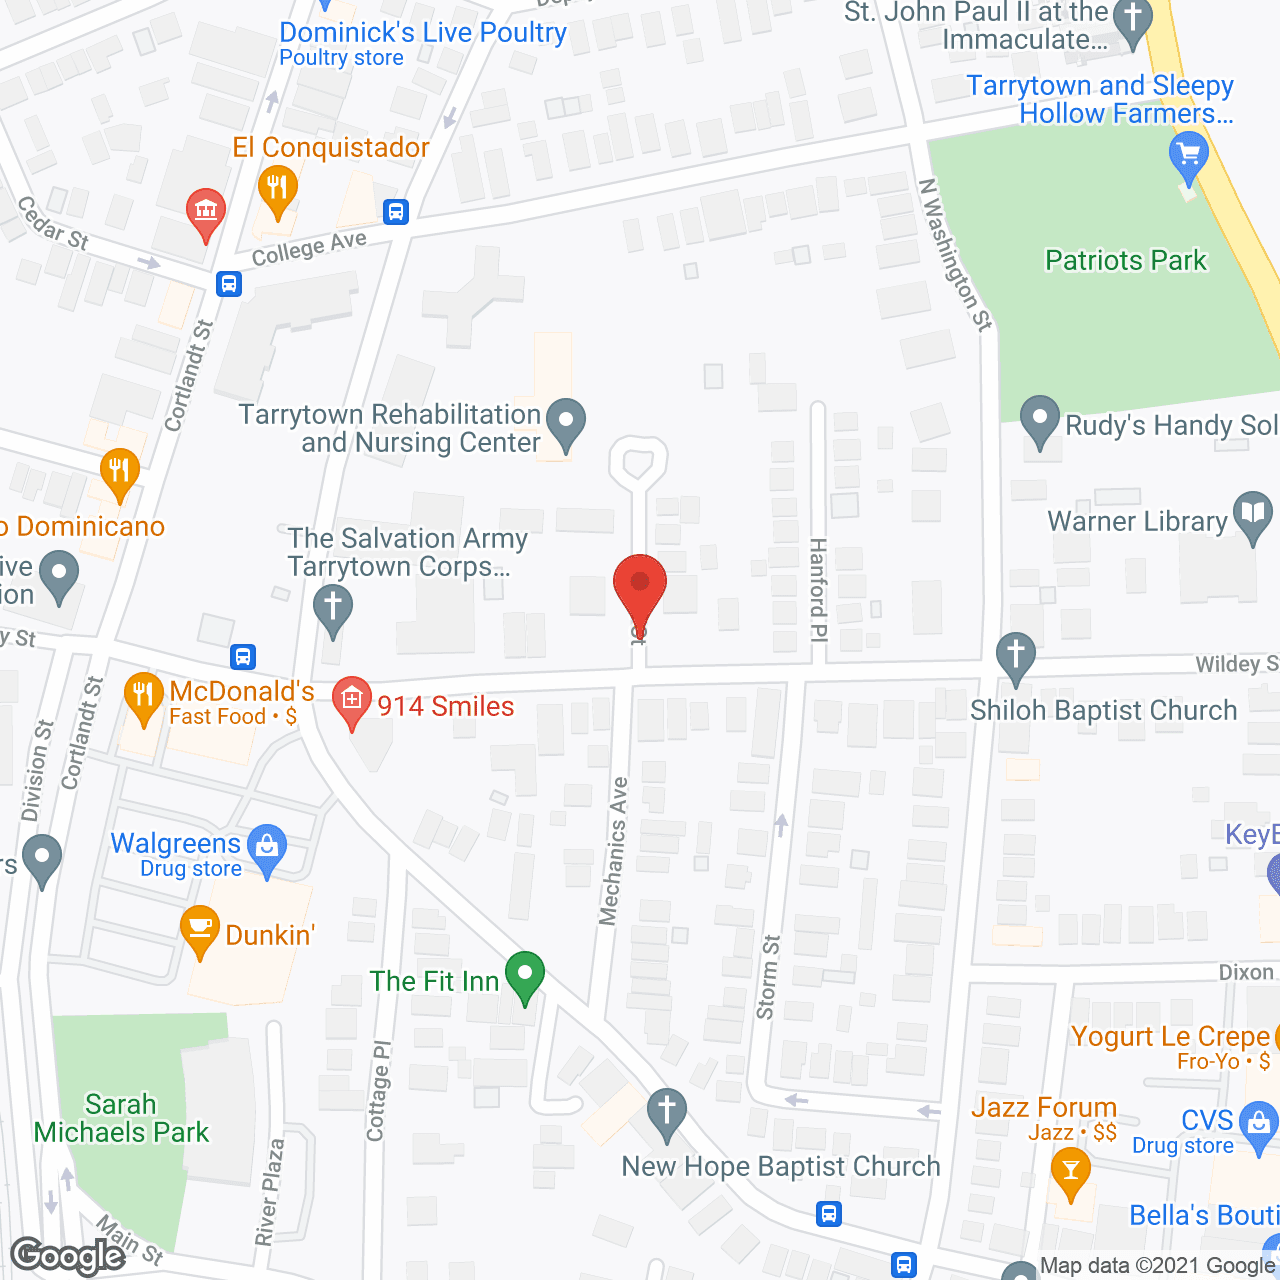 Tarrytown Hall Care Ctr in google map